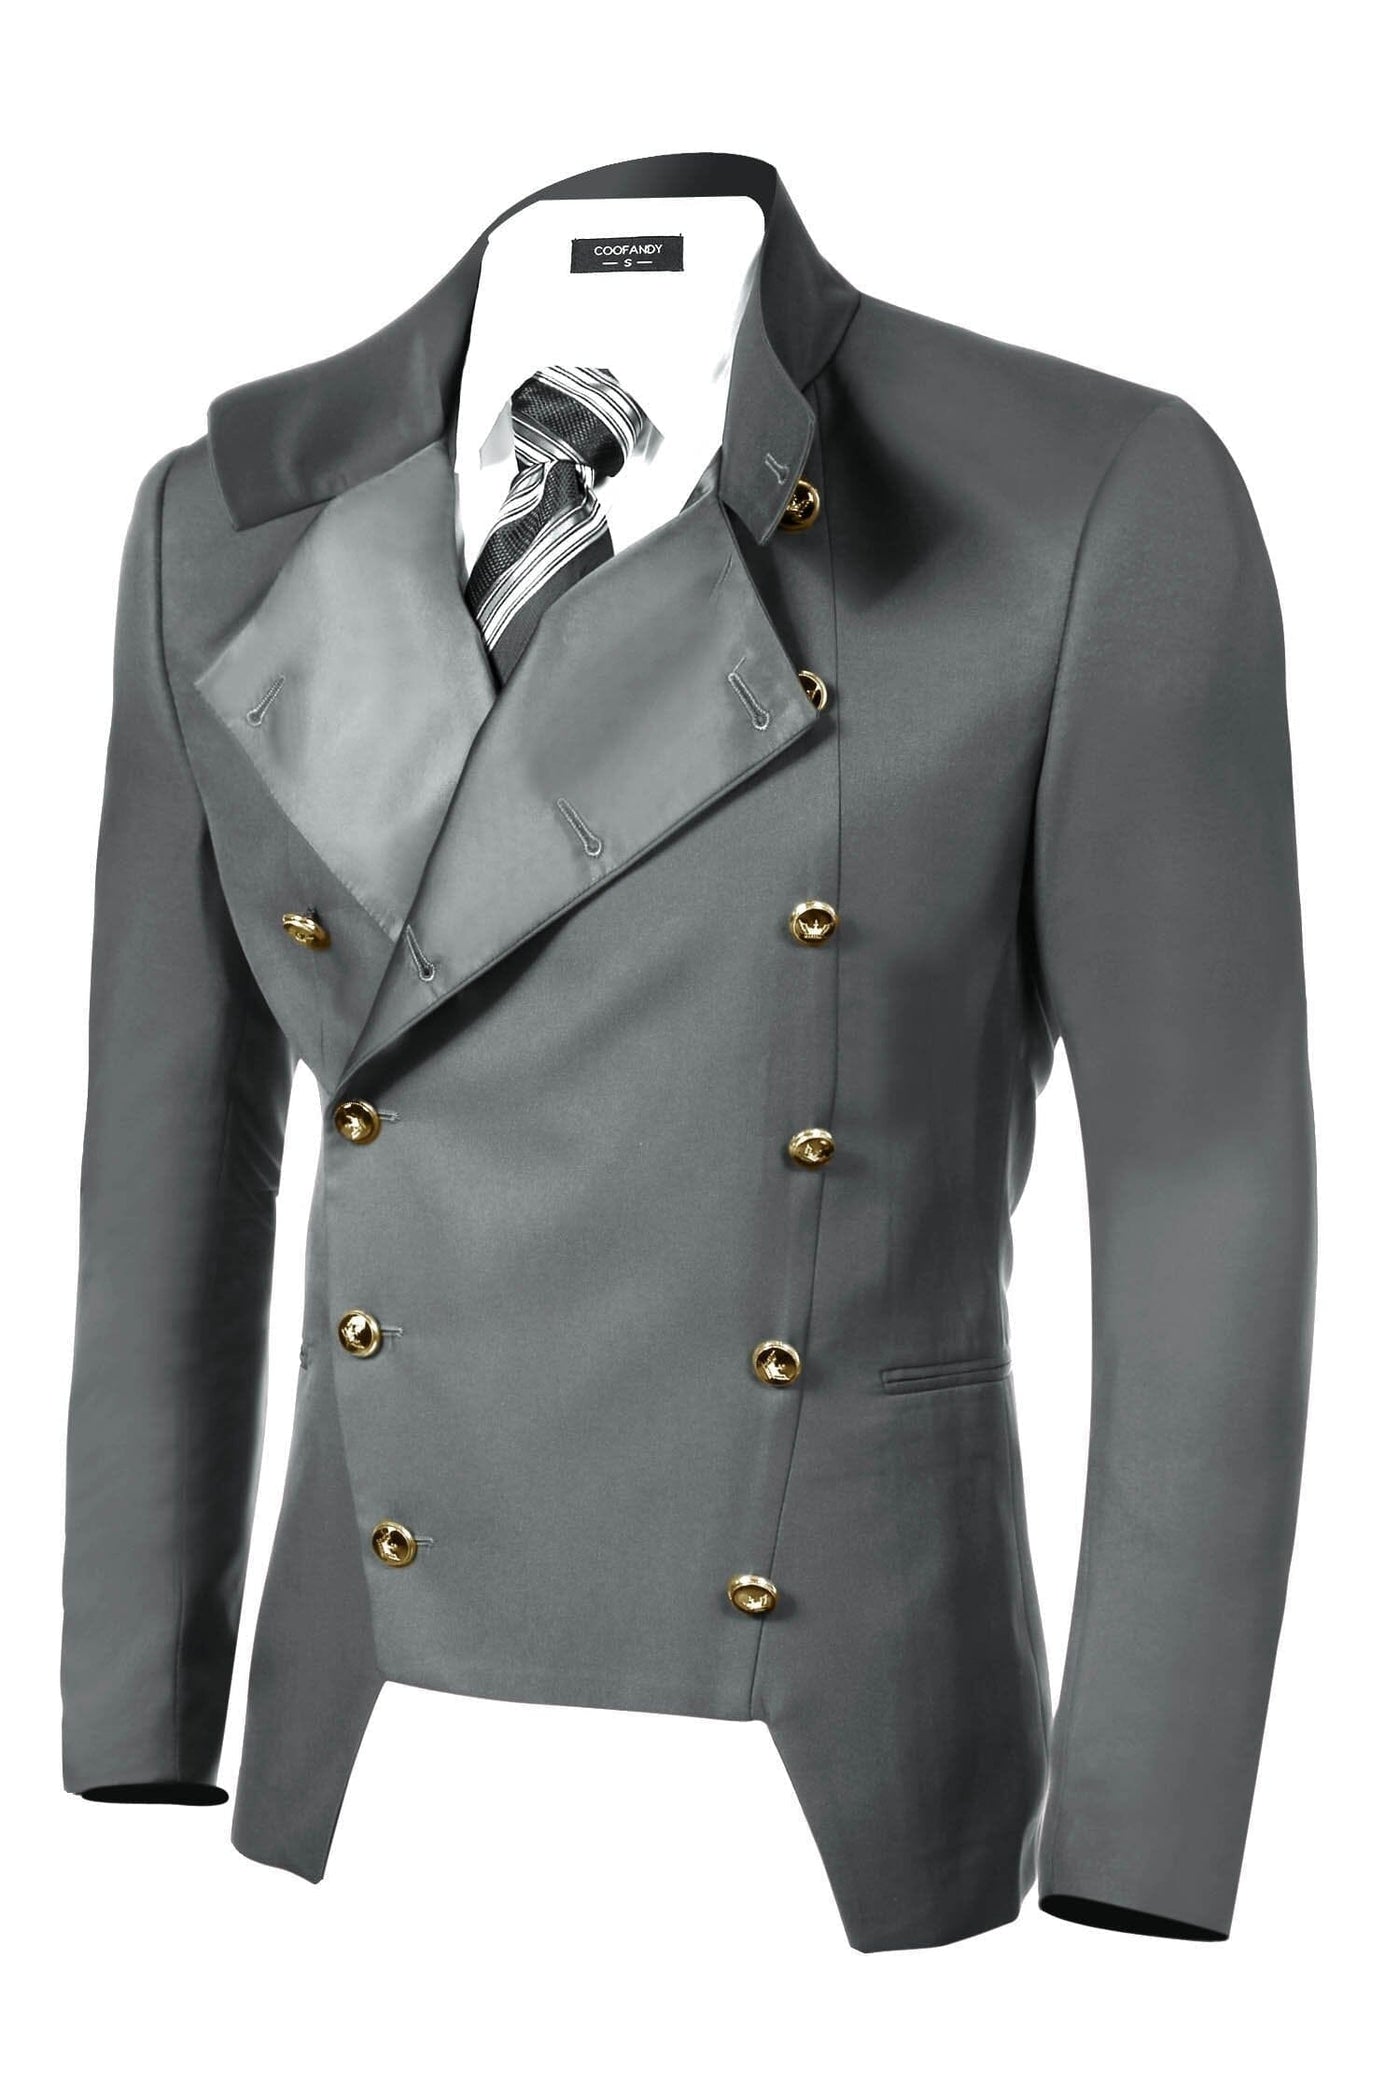 Coofandy Double-Breasted Blazer (US Only) Blazer coofandy Gray S 